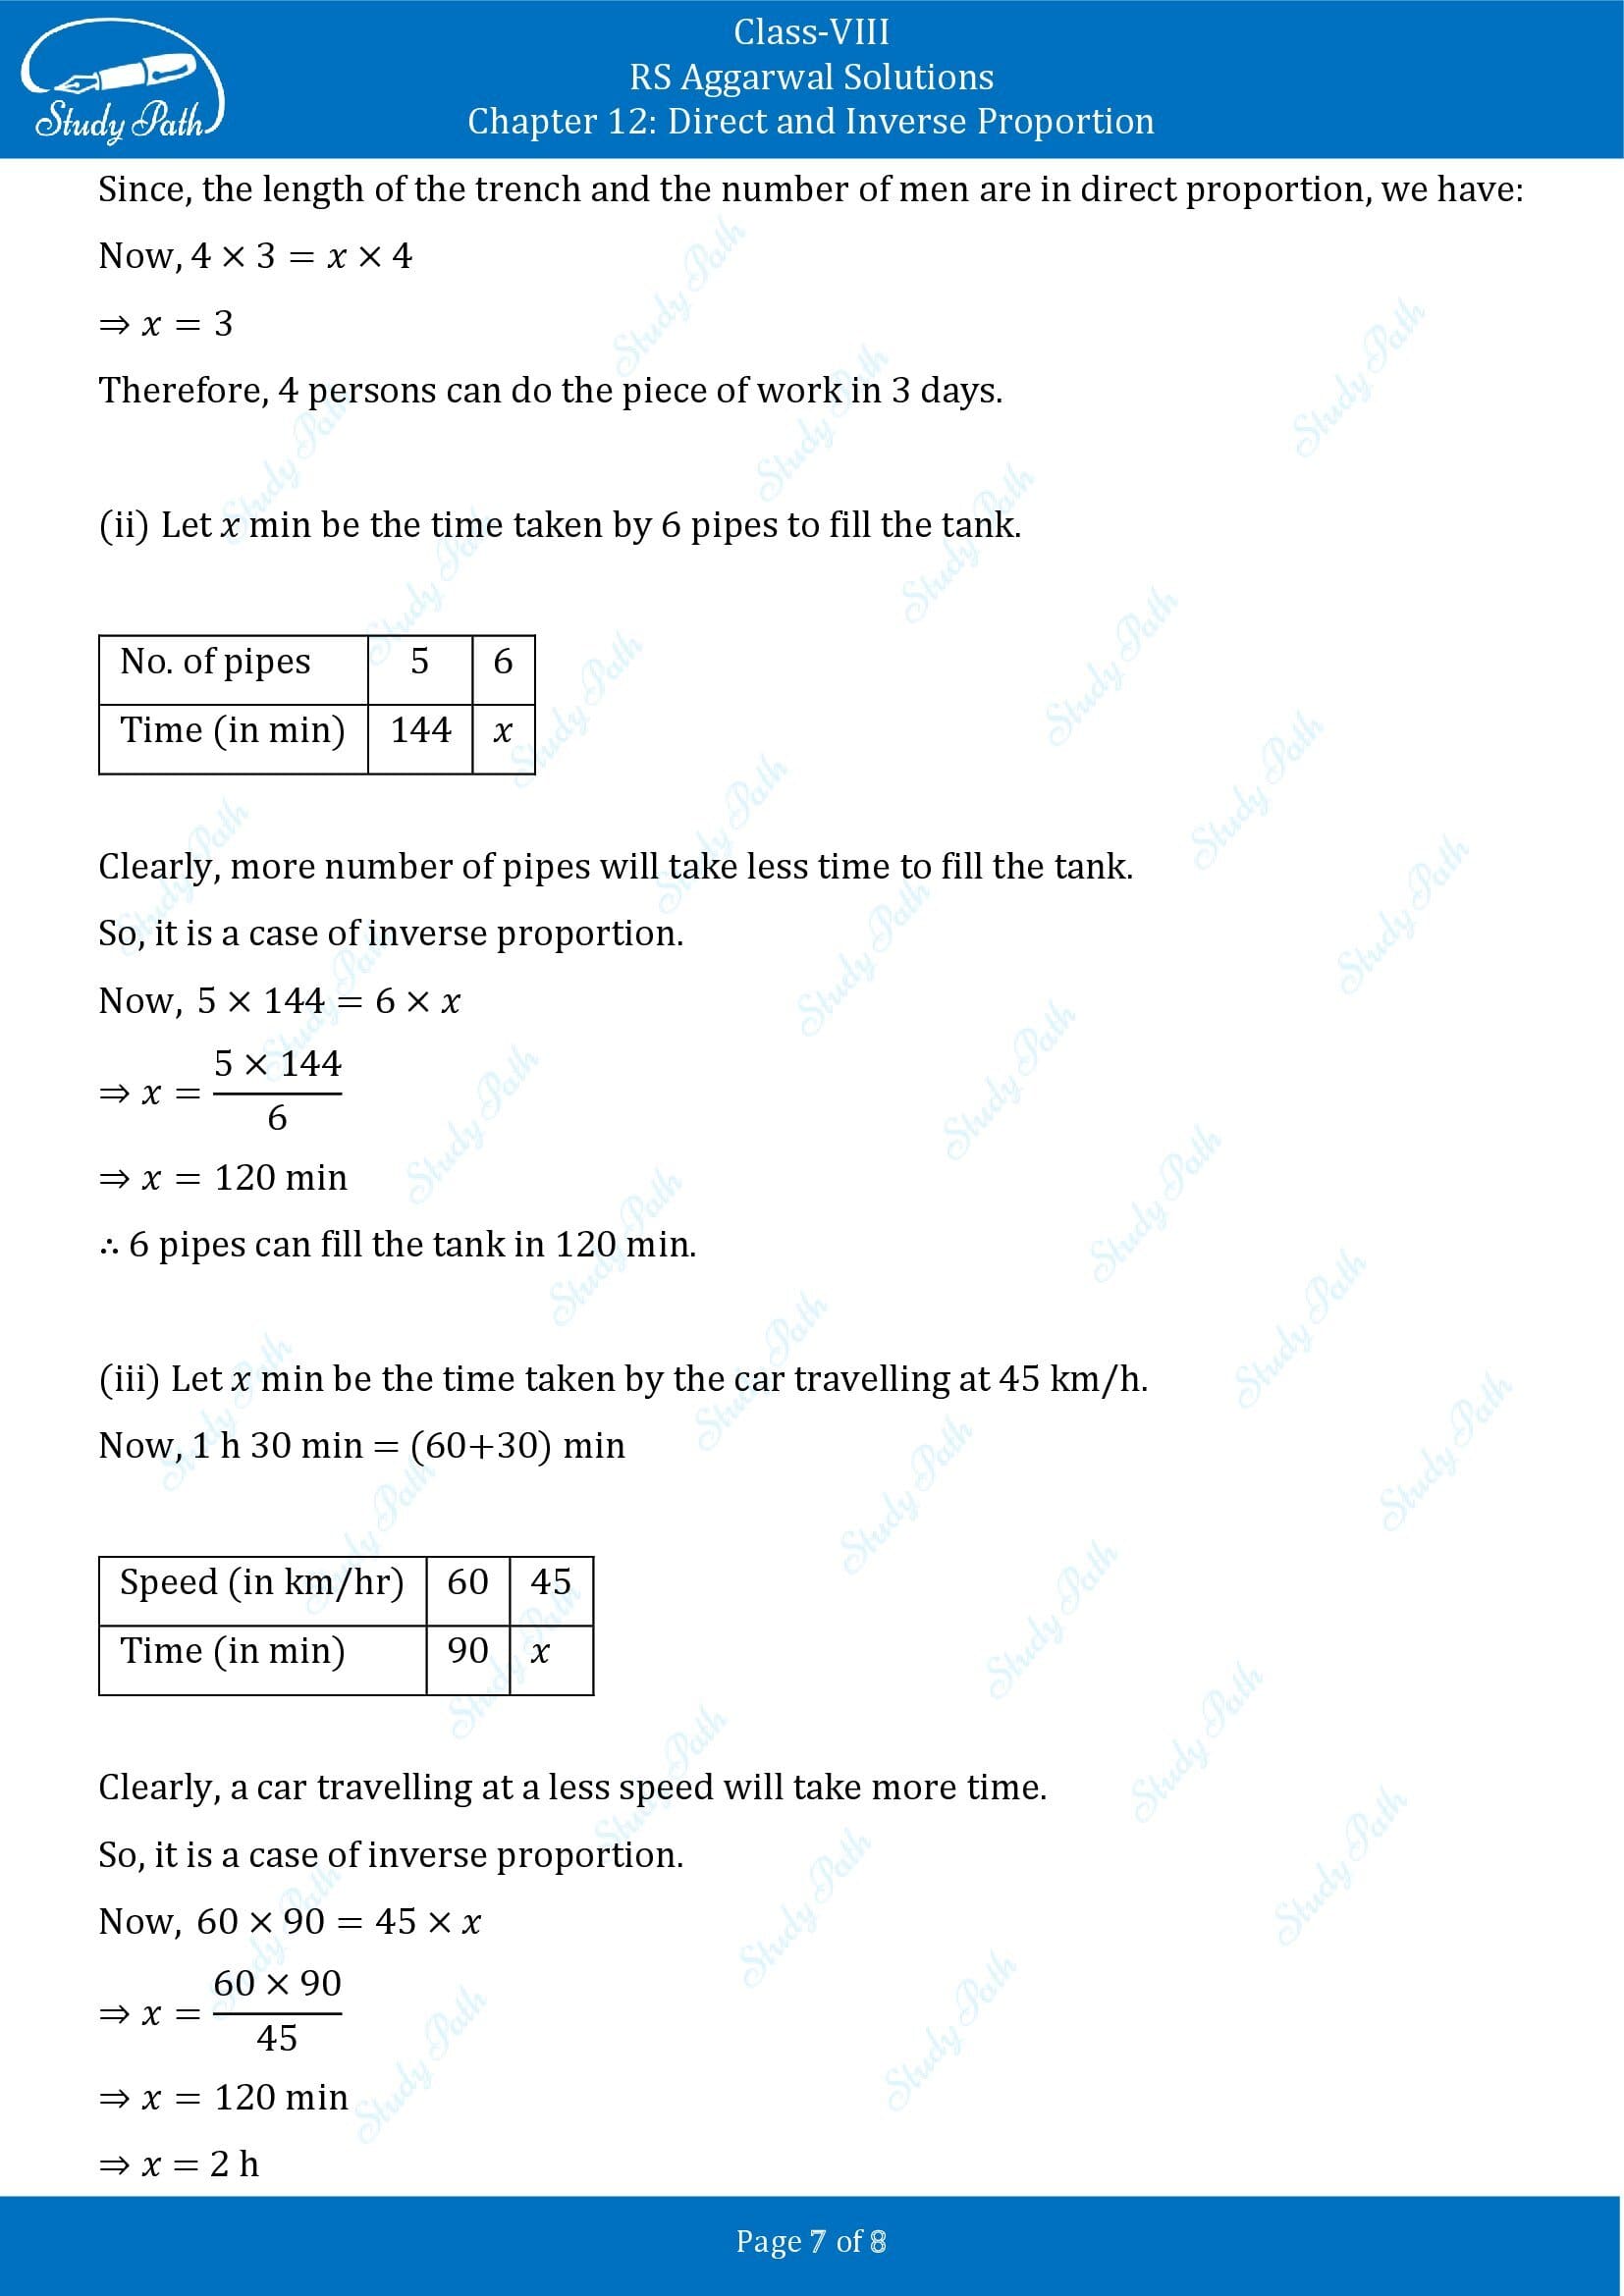 RS Aggarwal Solutions Class 8 Chapter 12 Direct and Inverse Proportion Test Paper 00007